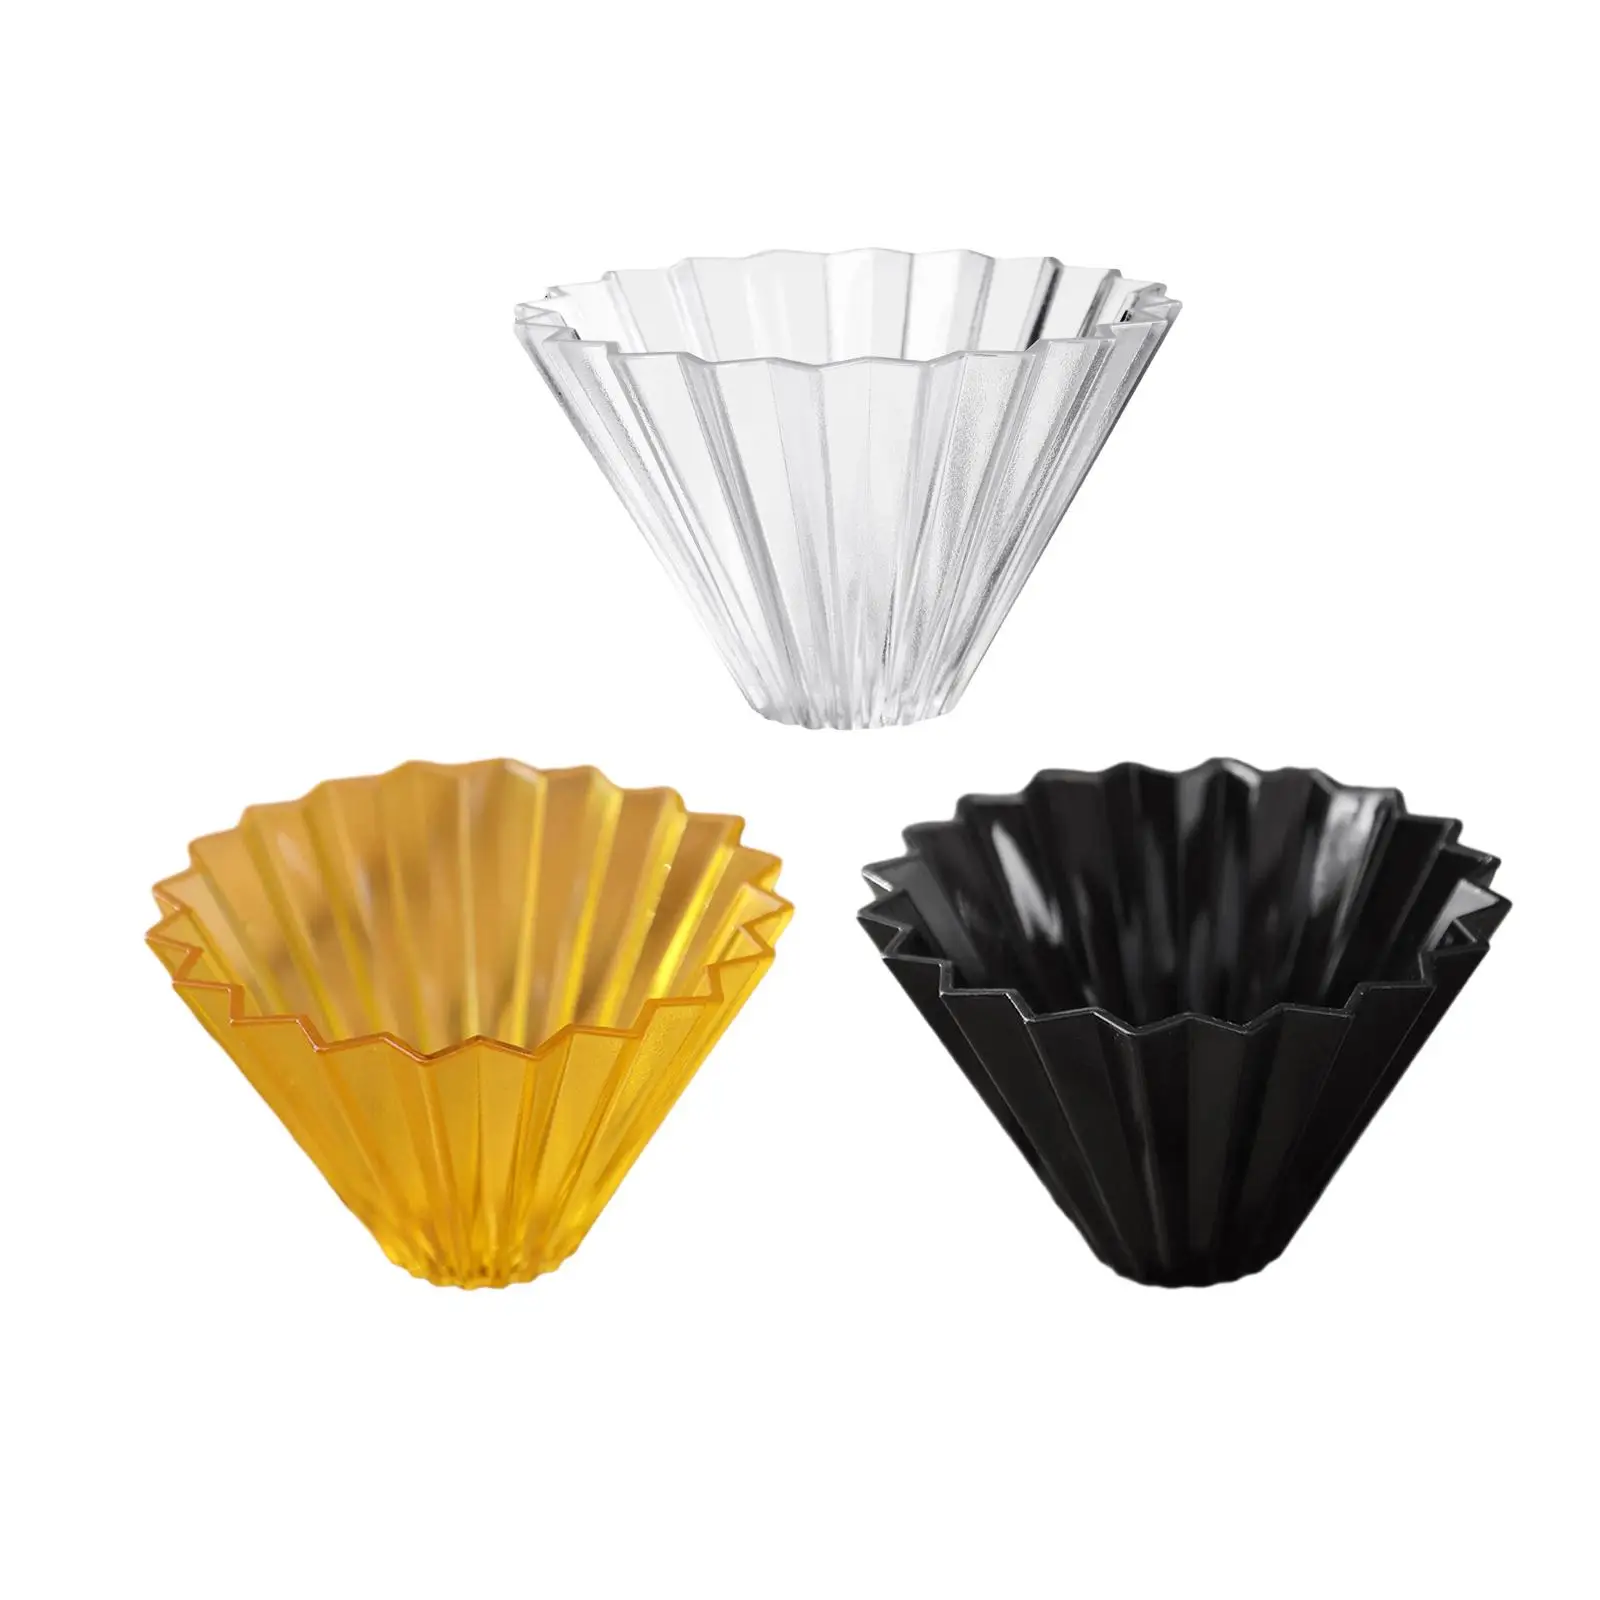 Pour over Coffee Filter Coffee Dripper Reusable for Single Cup Brew Coffee Filter Cone Coffee Filter Holder for Office